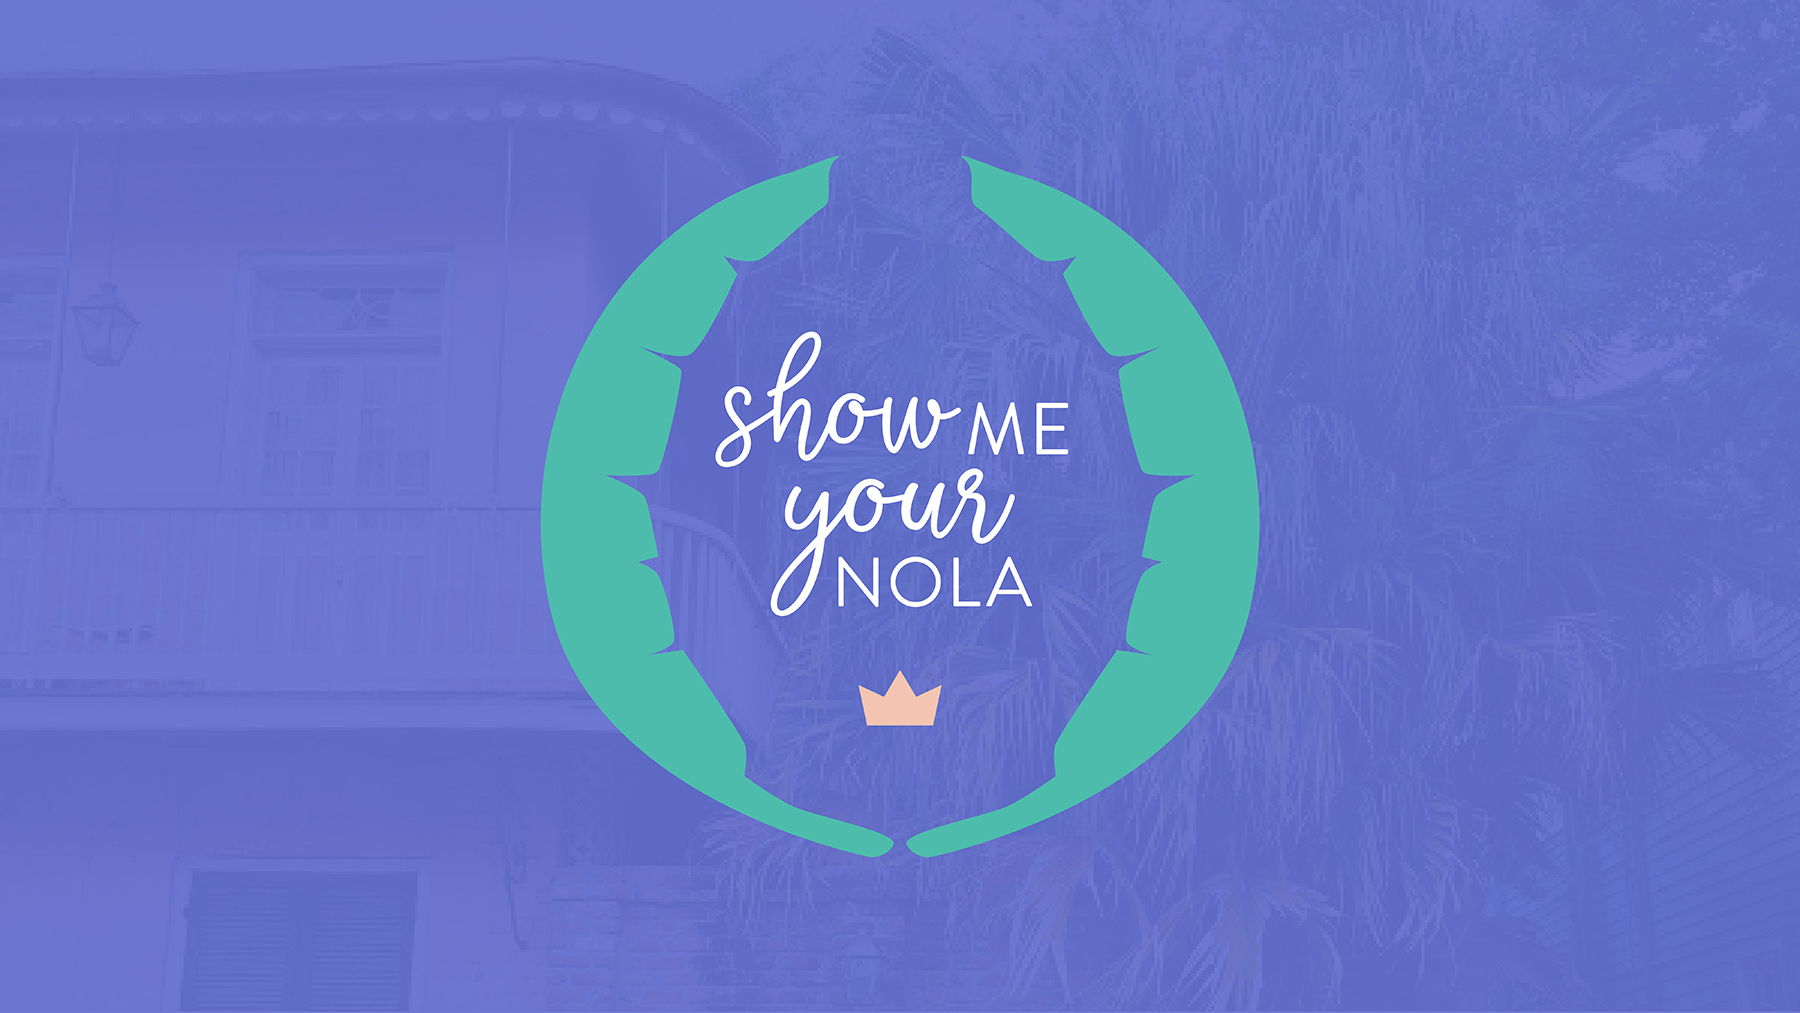 a clean, simple and chic logo that also expresses the fun, whimsy and magic of New Orleans